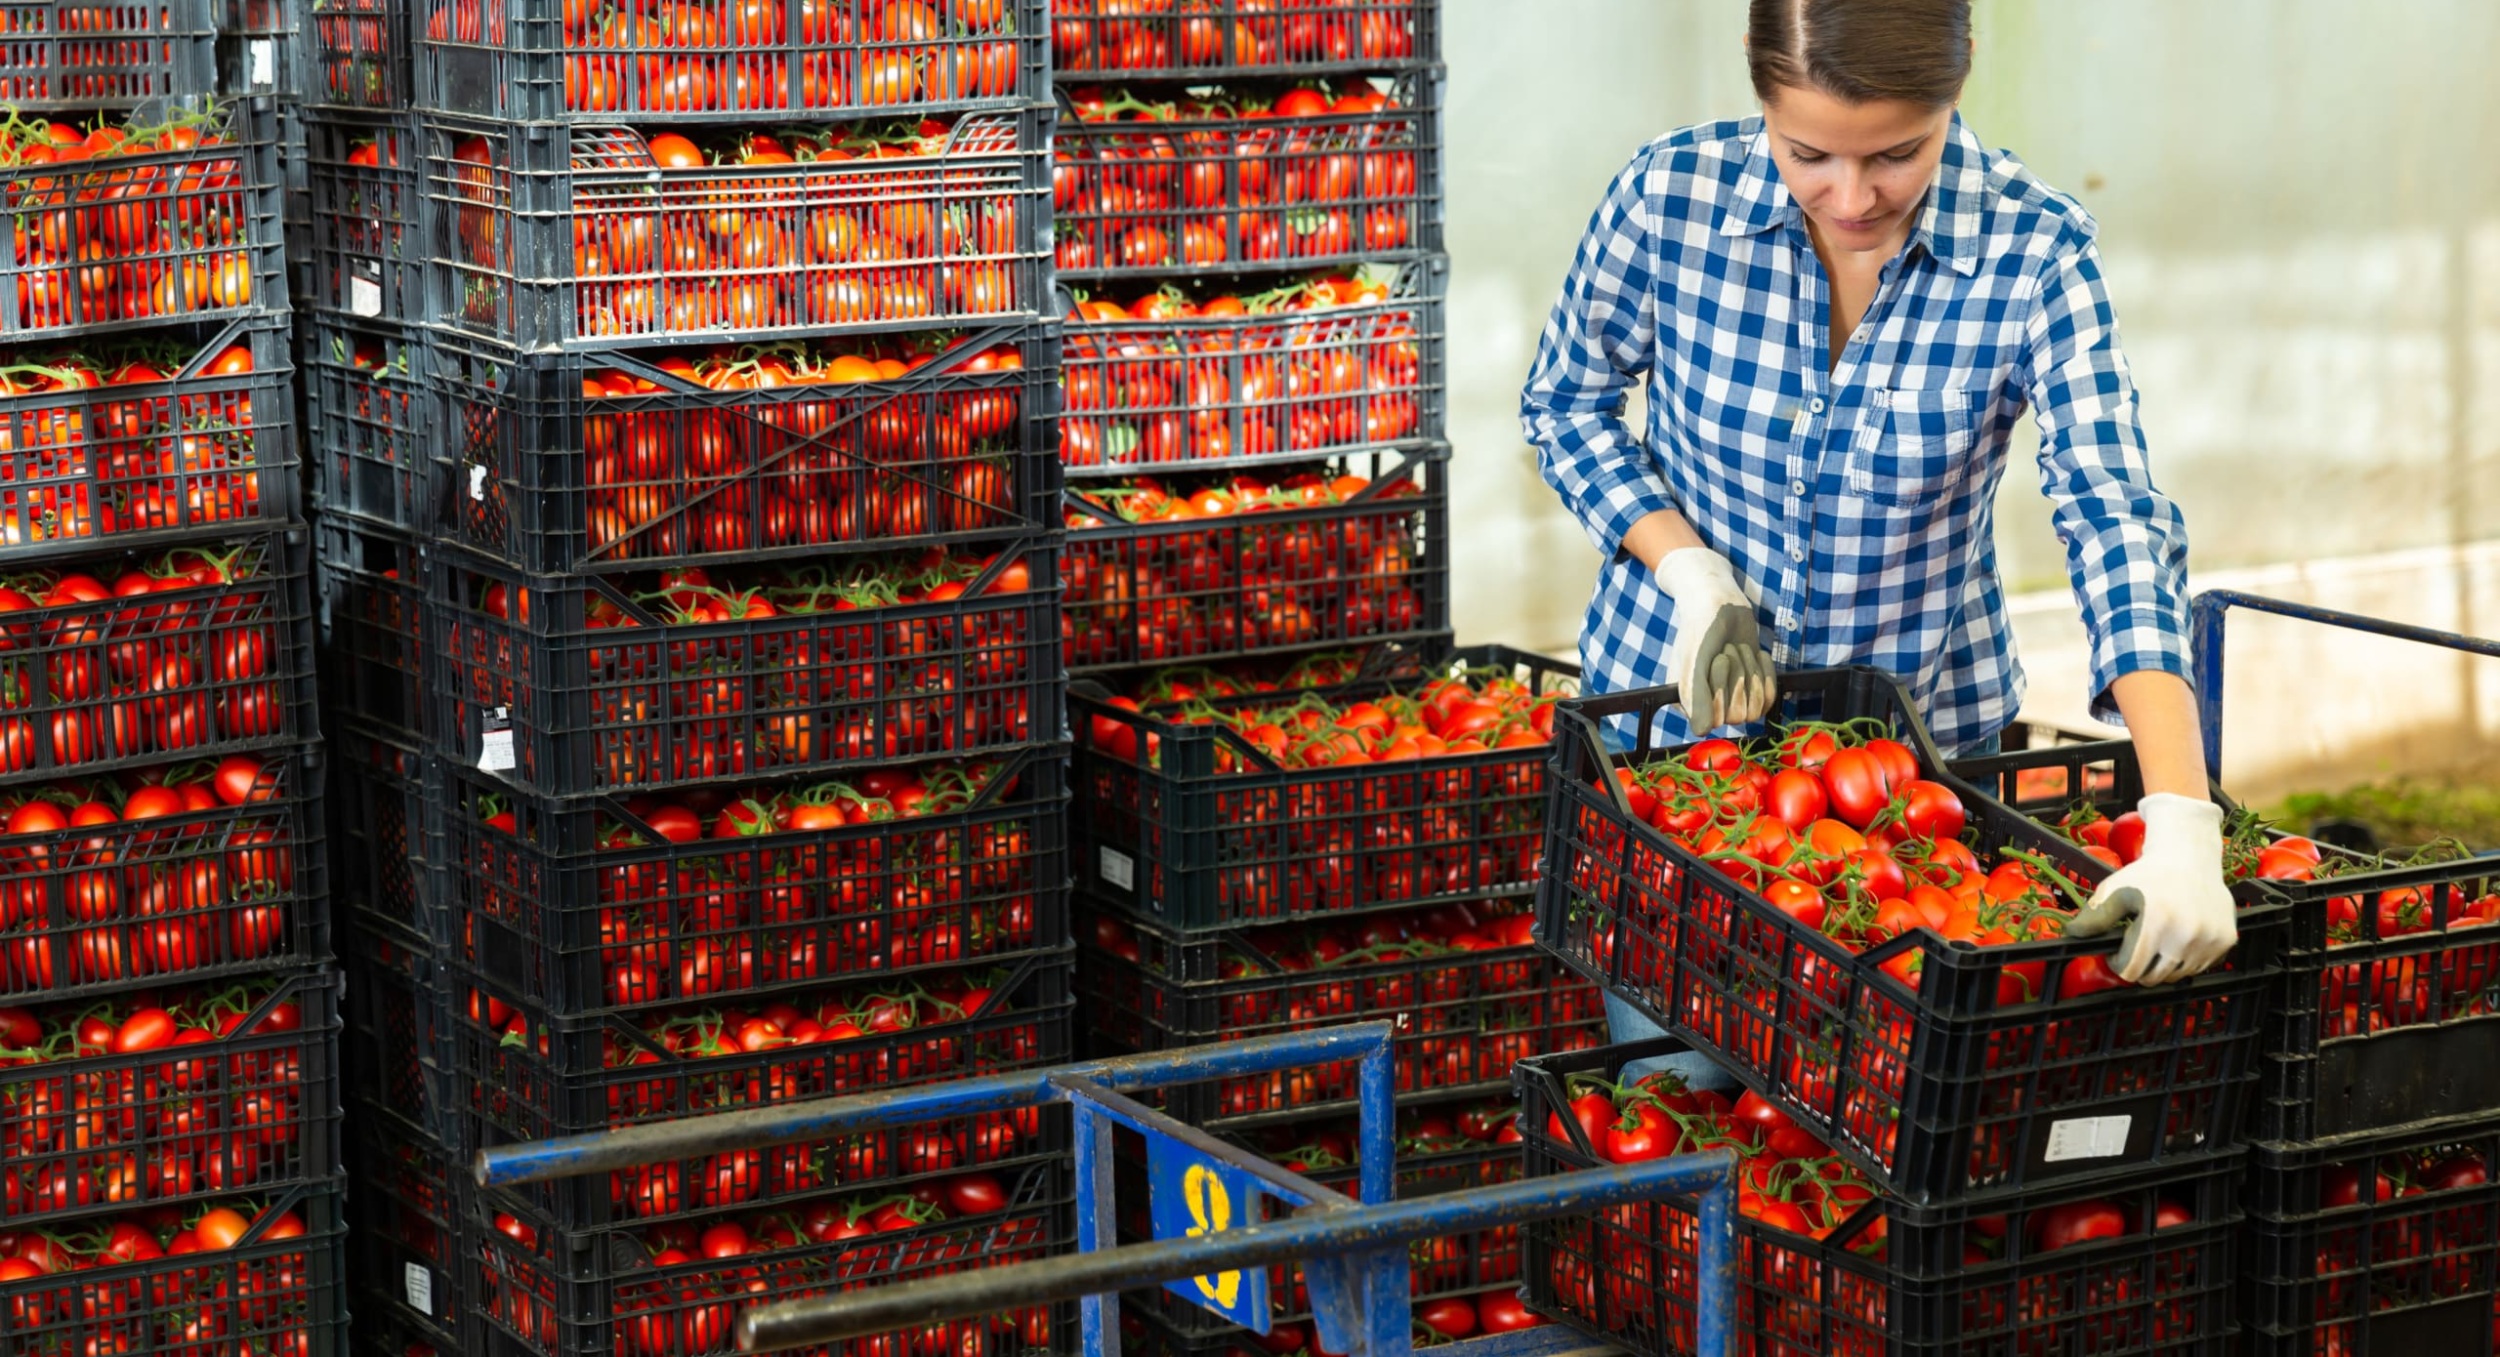 A women sorting fresh produce in a warehouse.